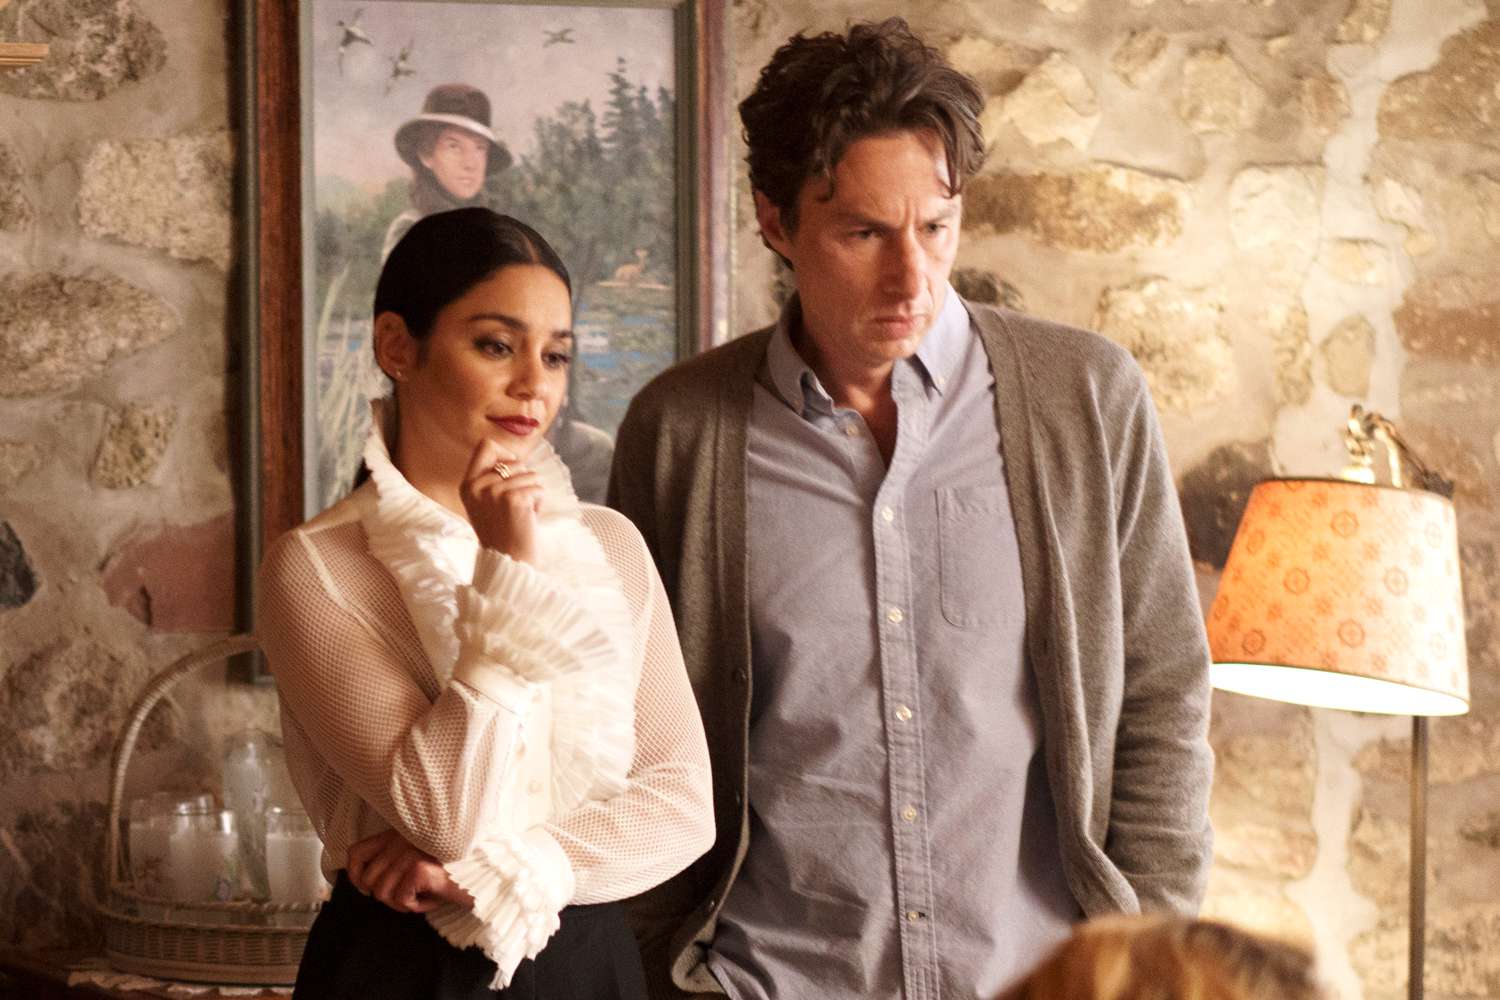 #FIRSTLOOK: NEW TRAILER FOR “FRENCH GIRL”